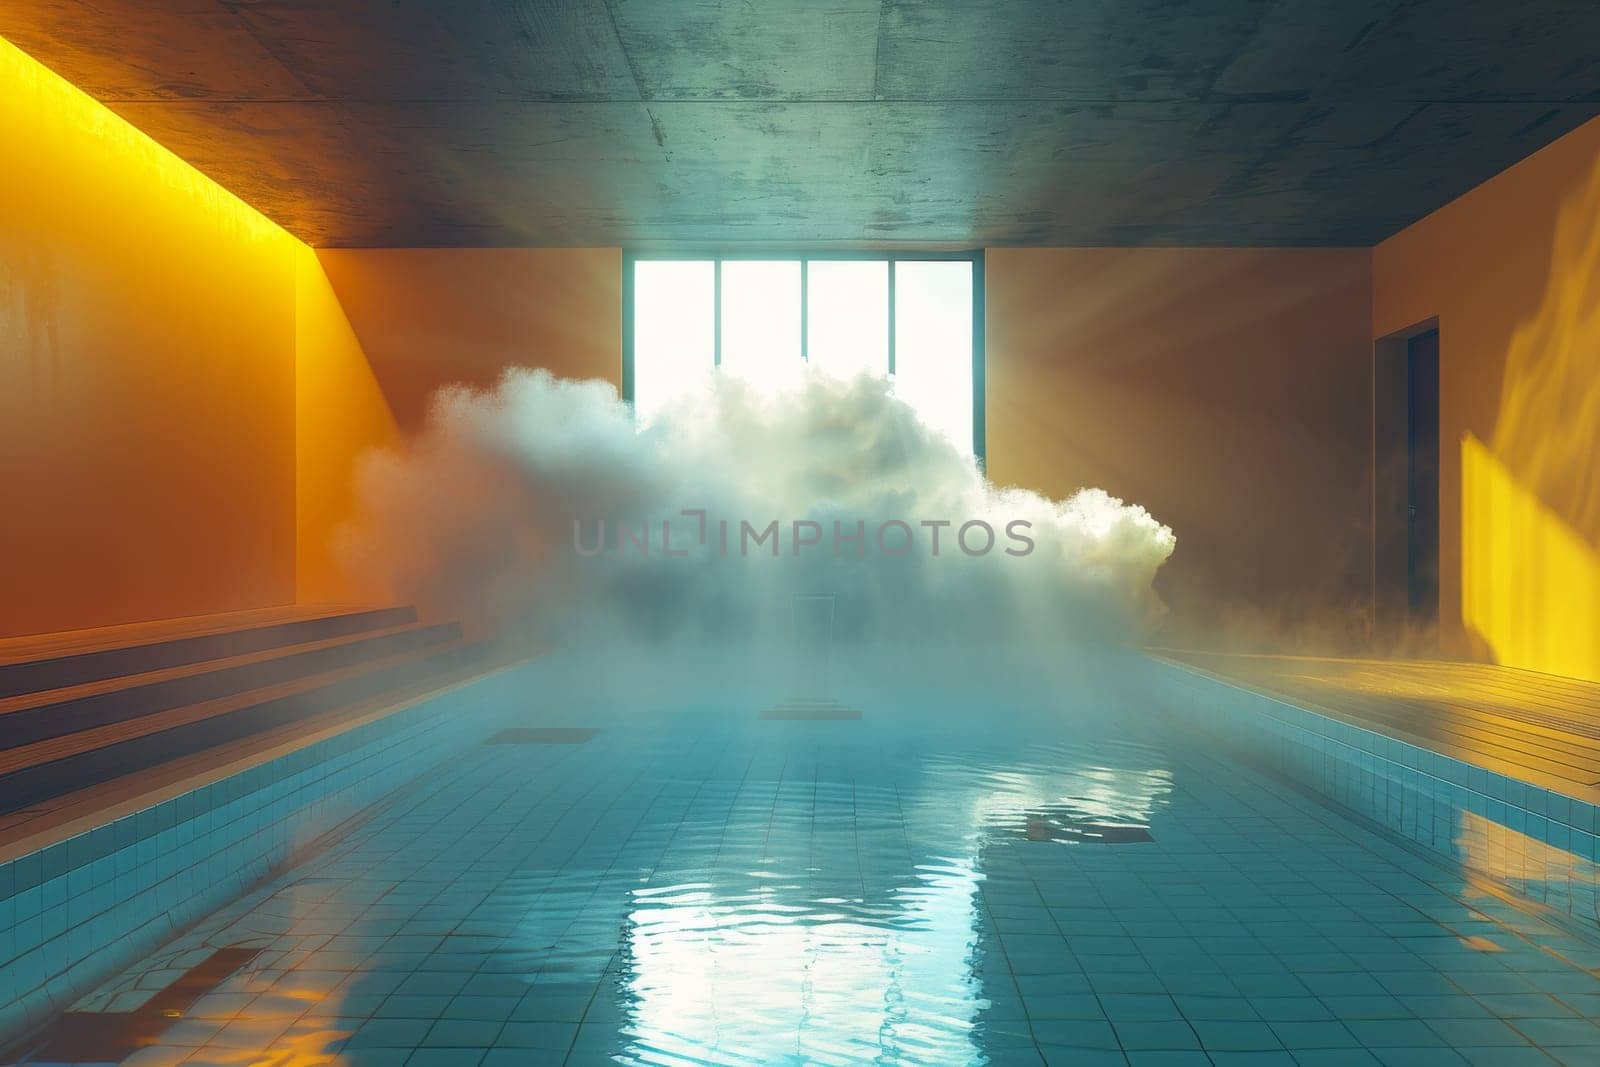 A cloud of steam is rising from a pool, creating a misty atmosphere. The room is dimly lit, with a single window letting in a soft, warm light. Concept of relaxation and tranquility